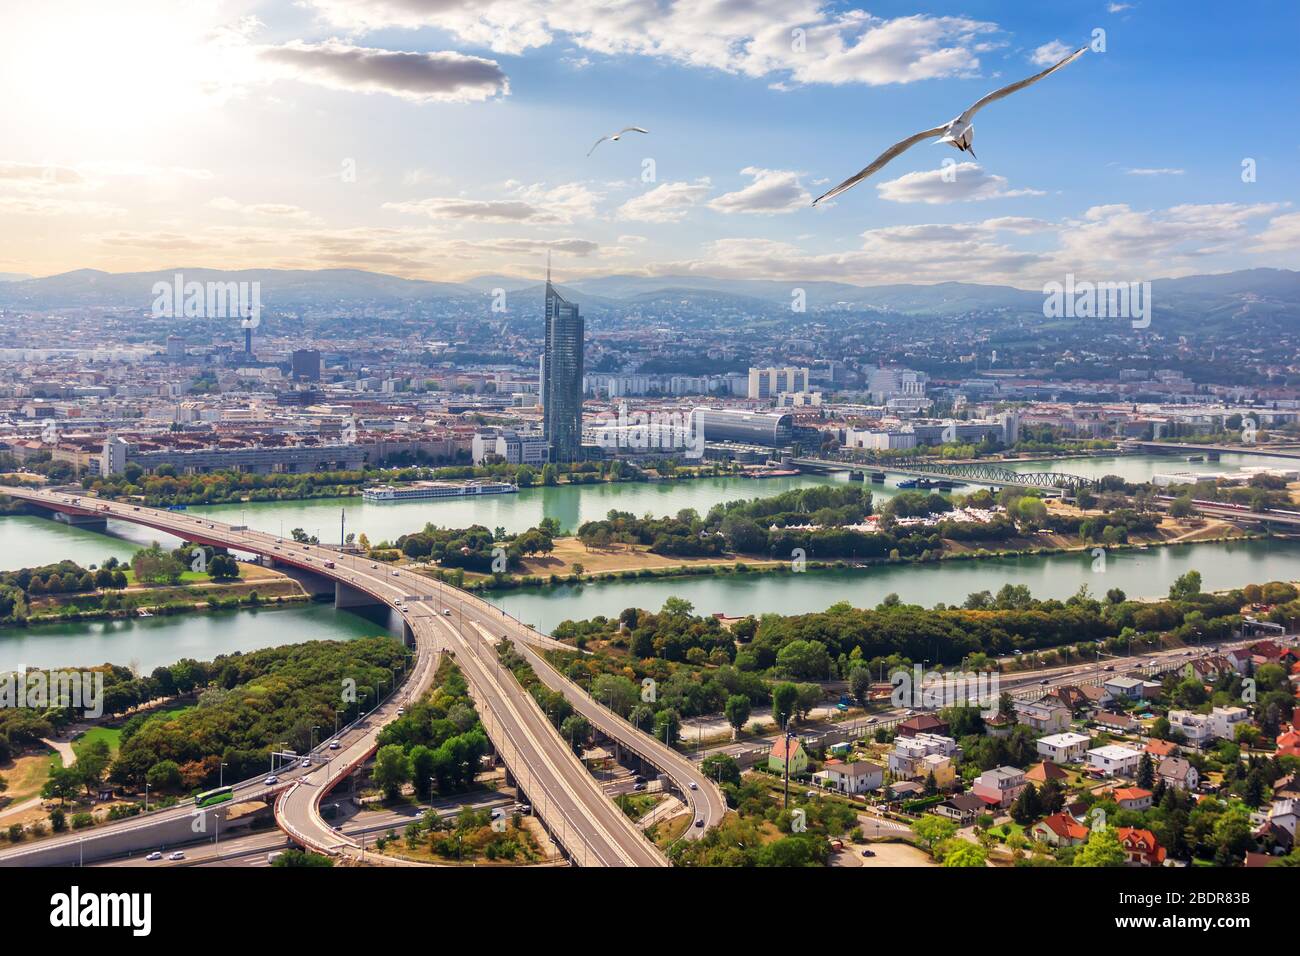 Vienna skyline, beautiful aerial view on the buildings and roads, Austria Stock Photo